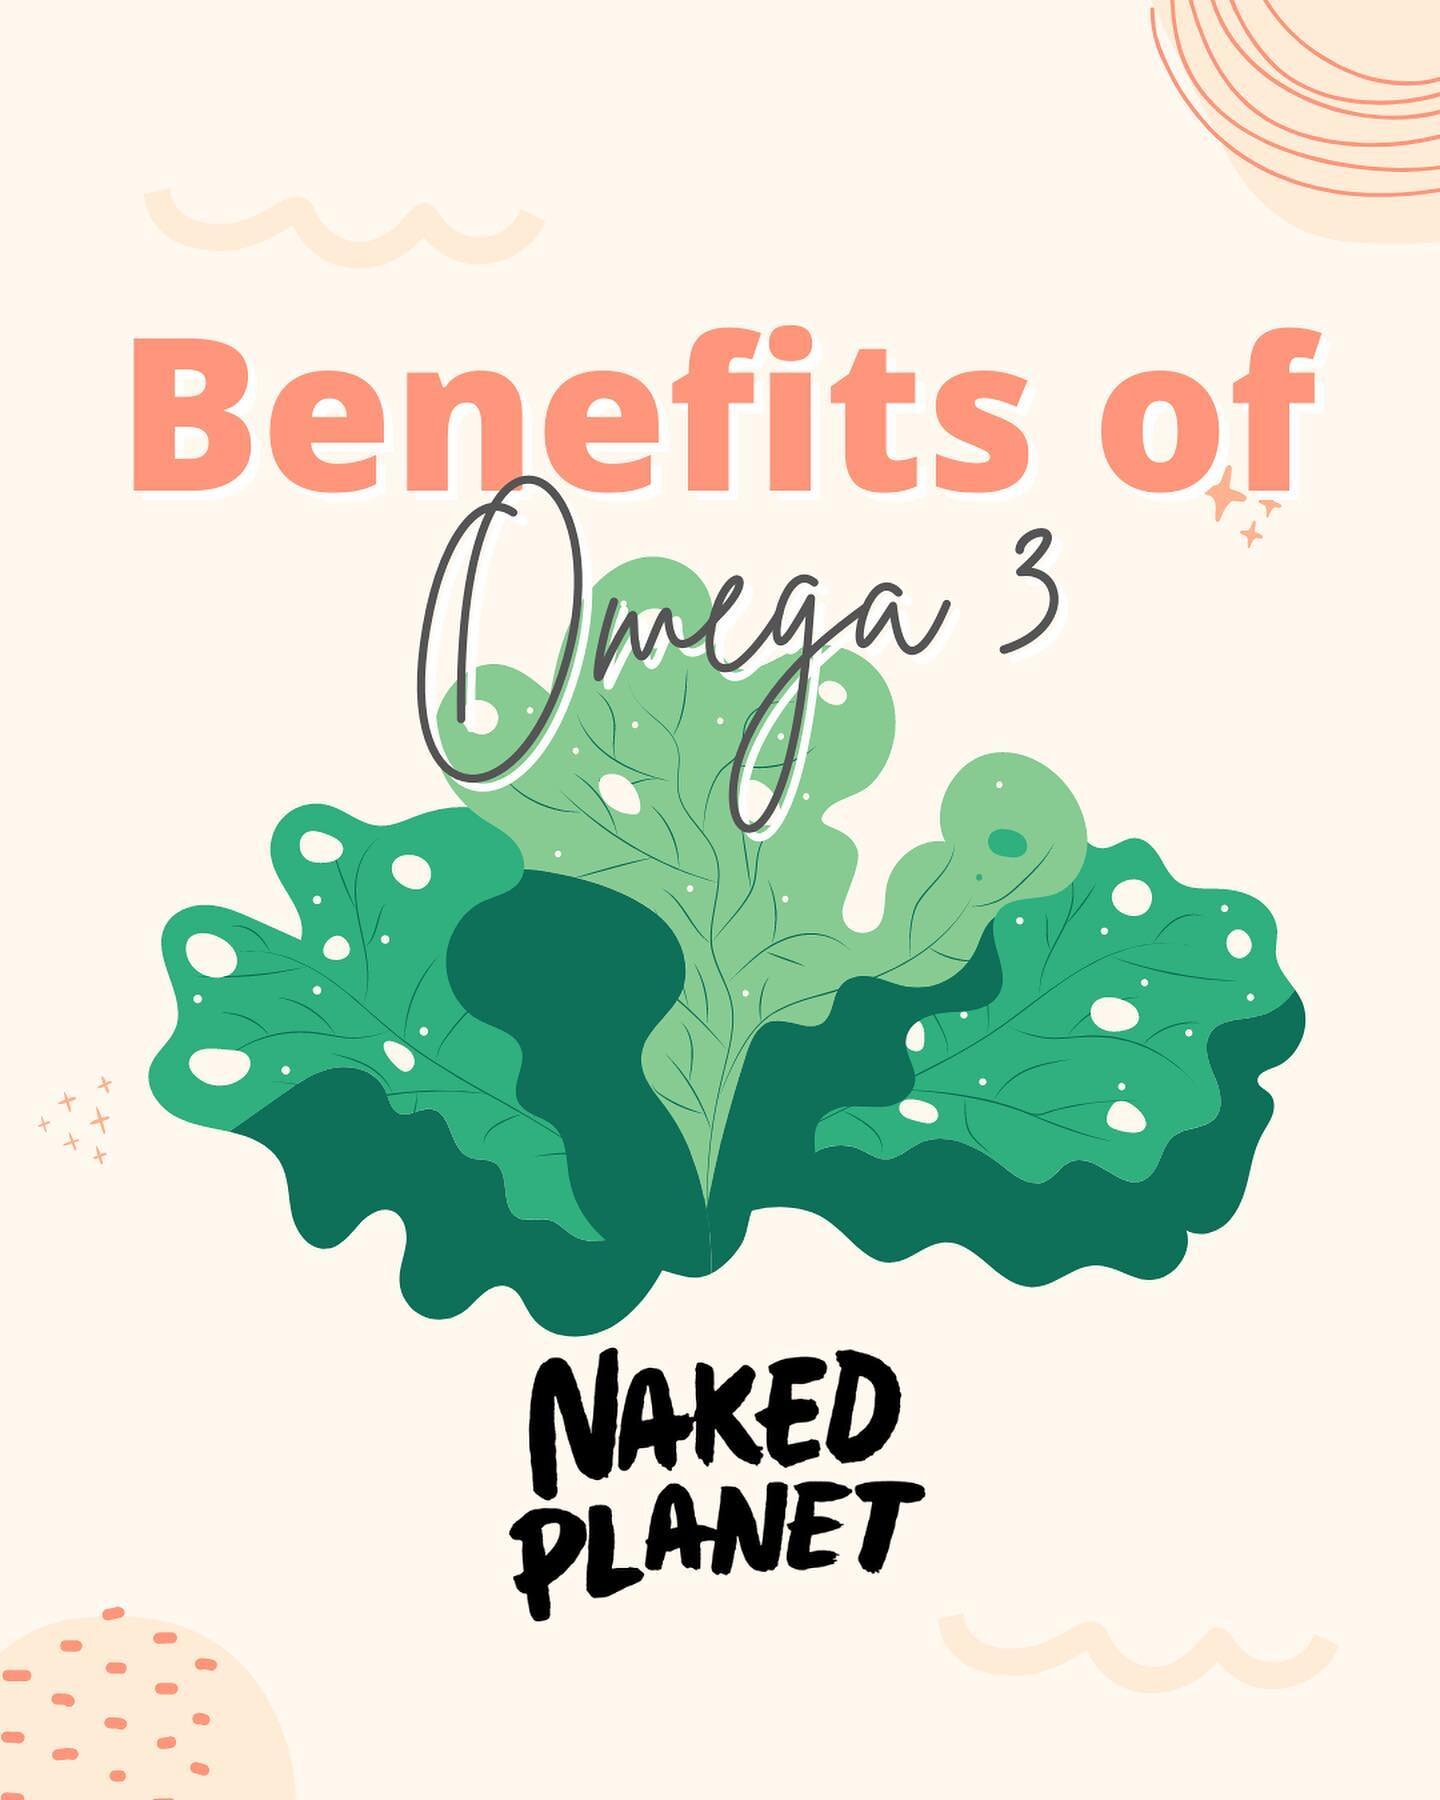 Did you know Naked Planet is the FIRST plant based yoghurt in Australia to include Omega-3?! 

We have gone direct to the source which is Algal Omega 3 (DHA). Each serve of Naked Planet yogurt has 60mg of DHA which is an important nutrient for suppor